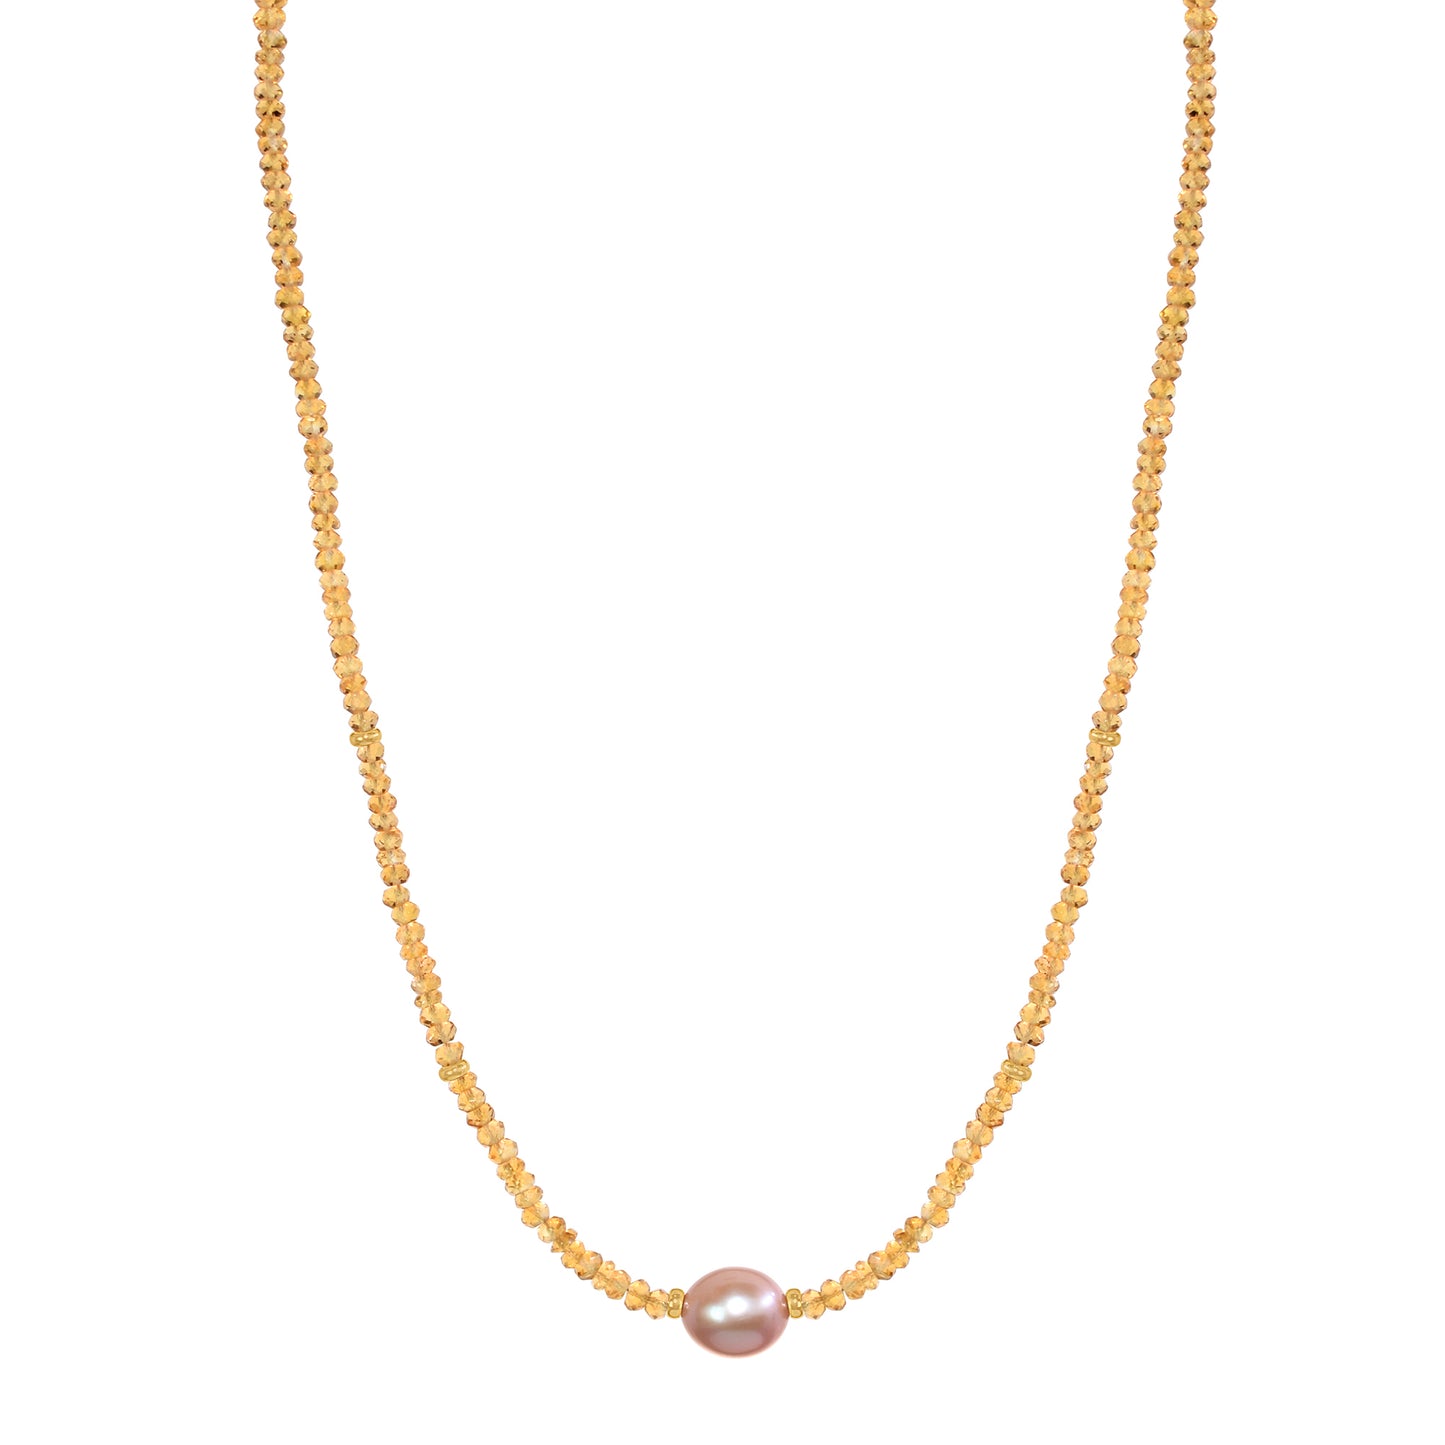 14k Gemstone Freshwater Pearl Center Necklace 17" Citrine & Pink Pearl